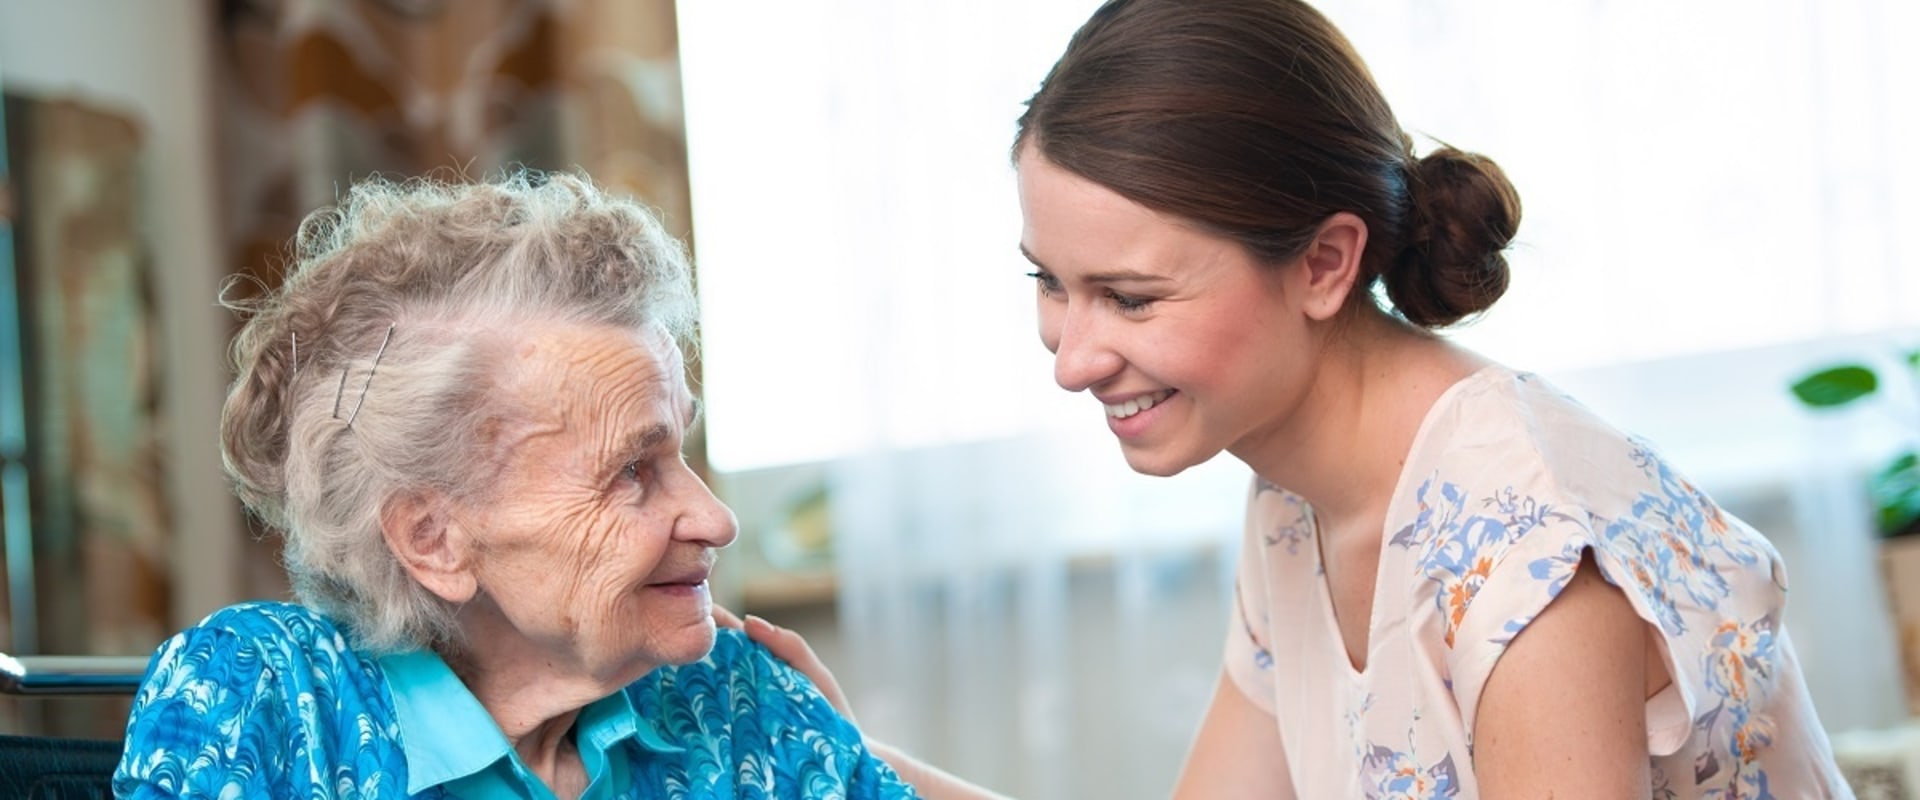 What Type of Care is Provided in a Person's Home?